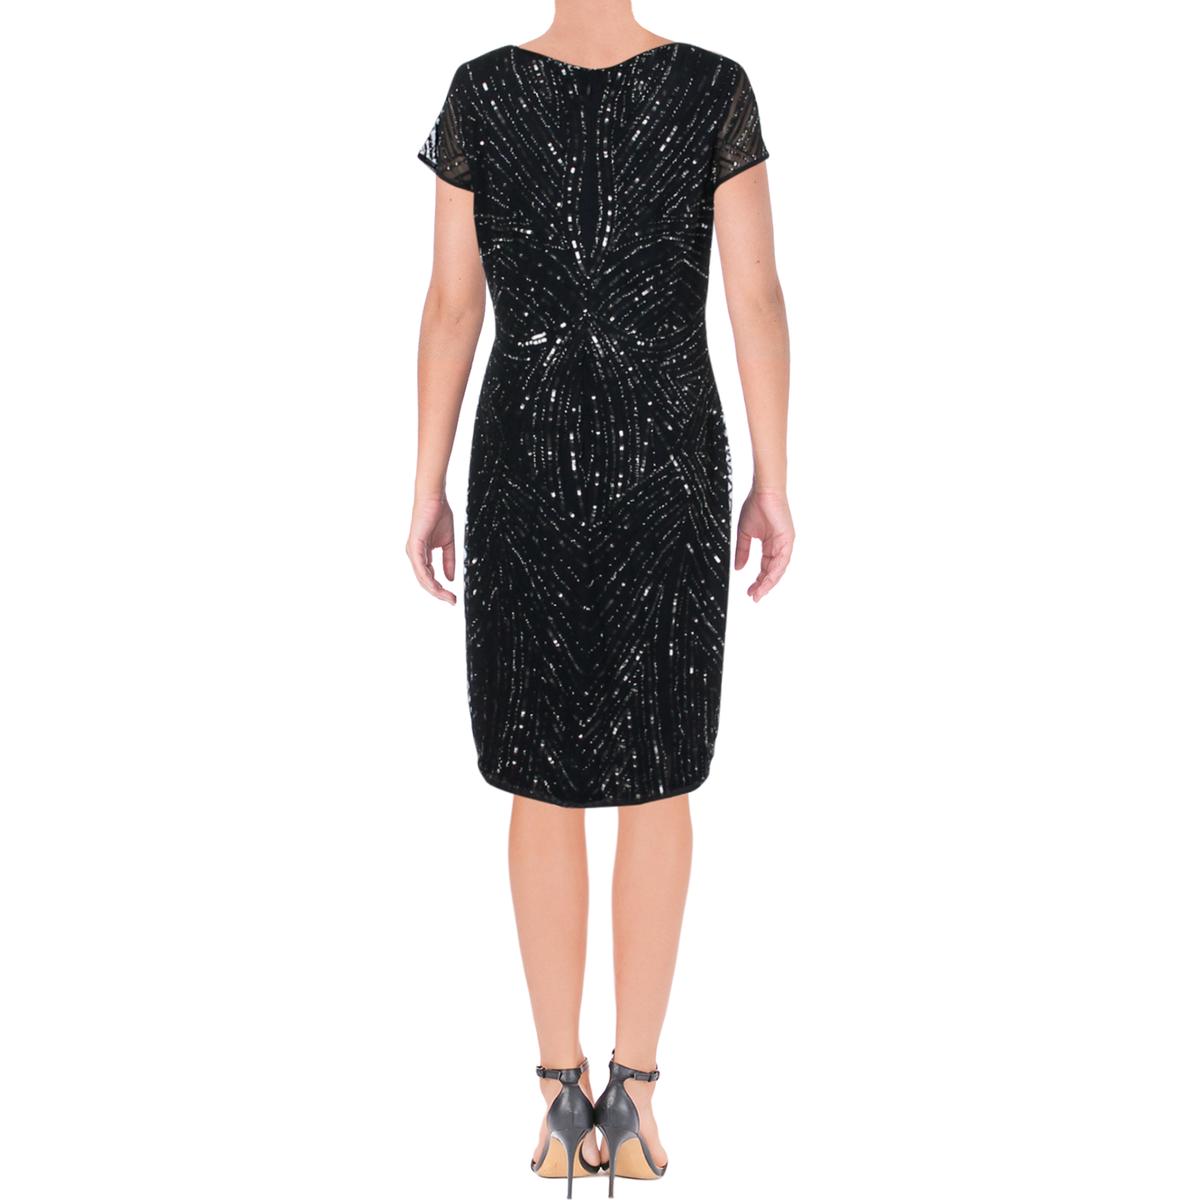 Adrianna Papell Womens Navy Mesh Embellished Party Cocktail Dress 12 ...